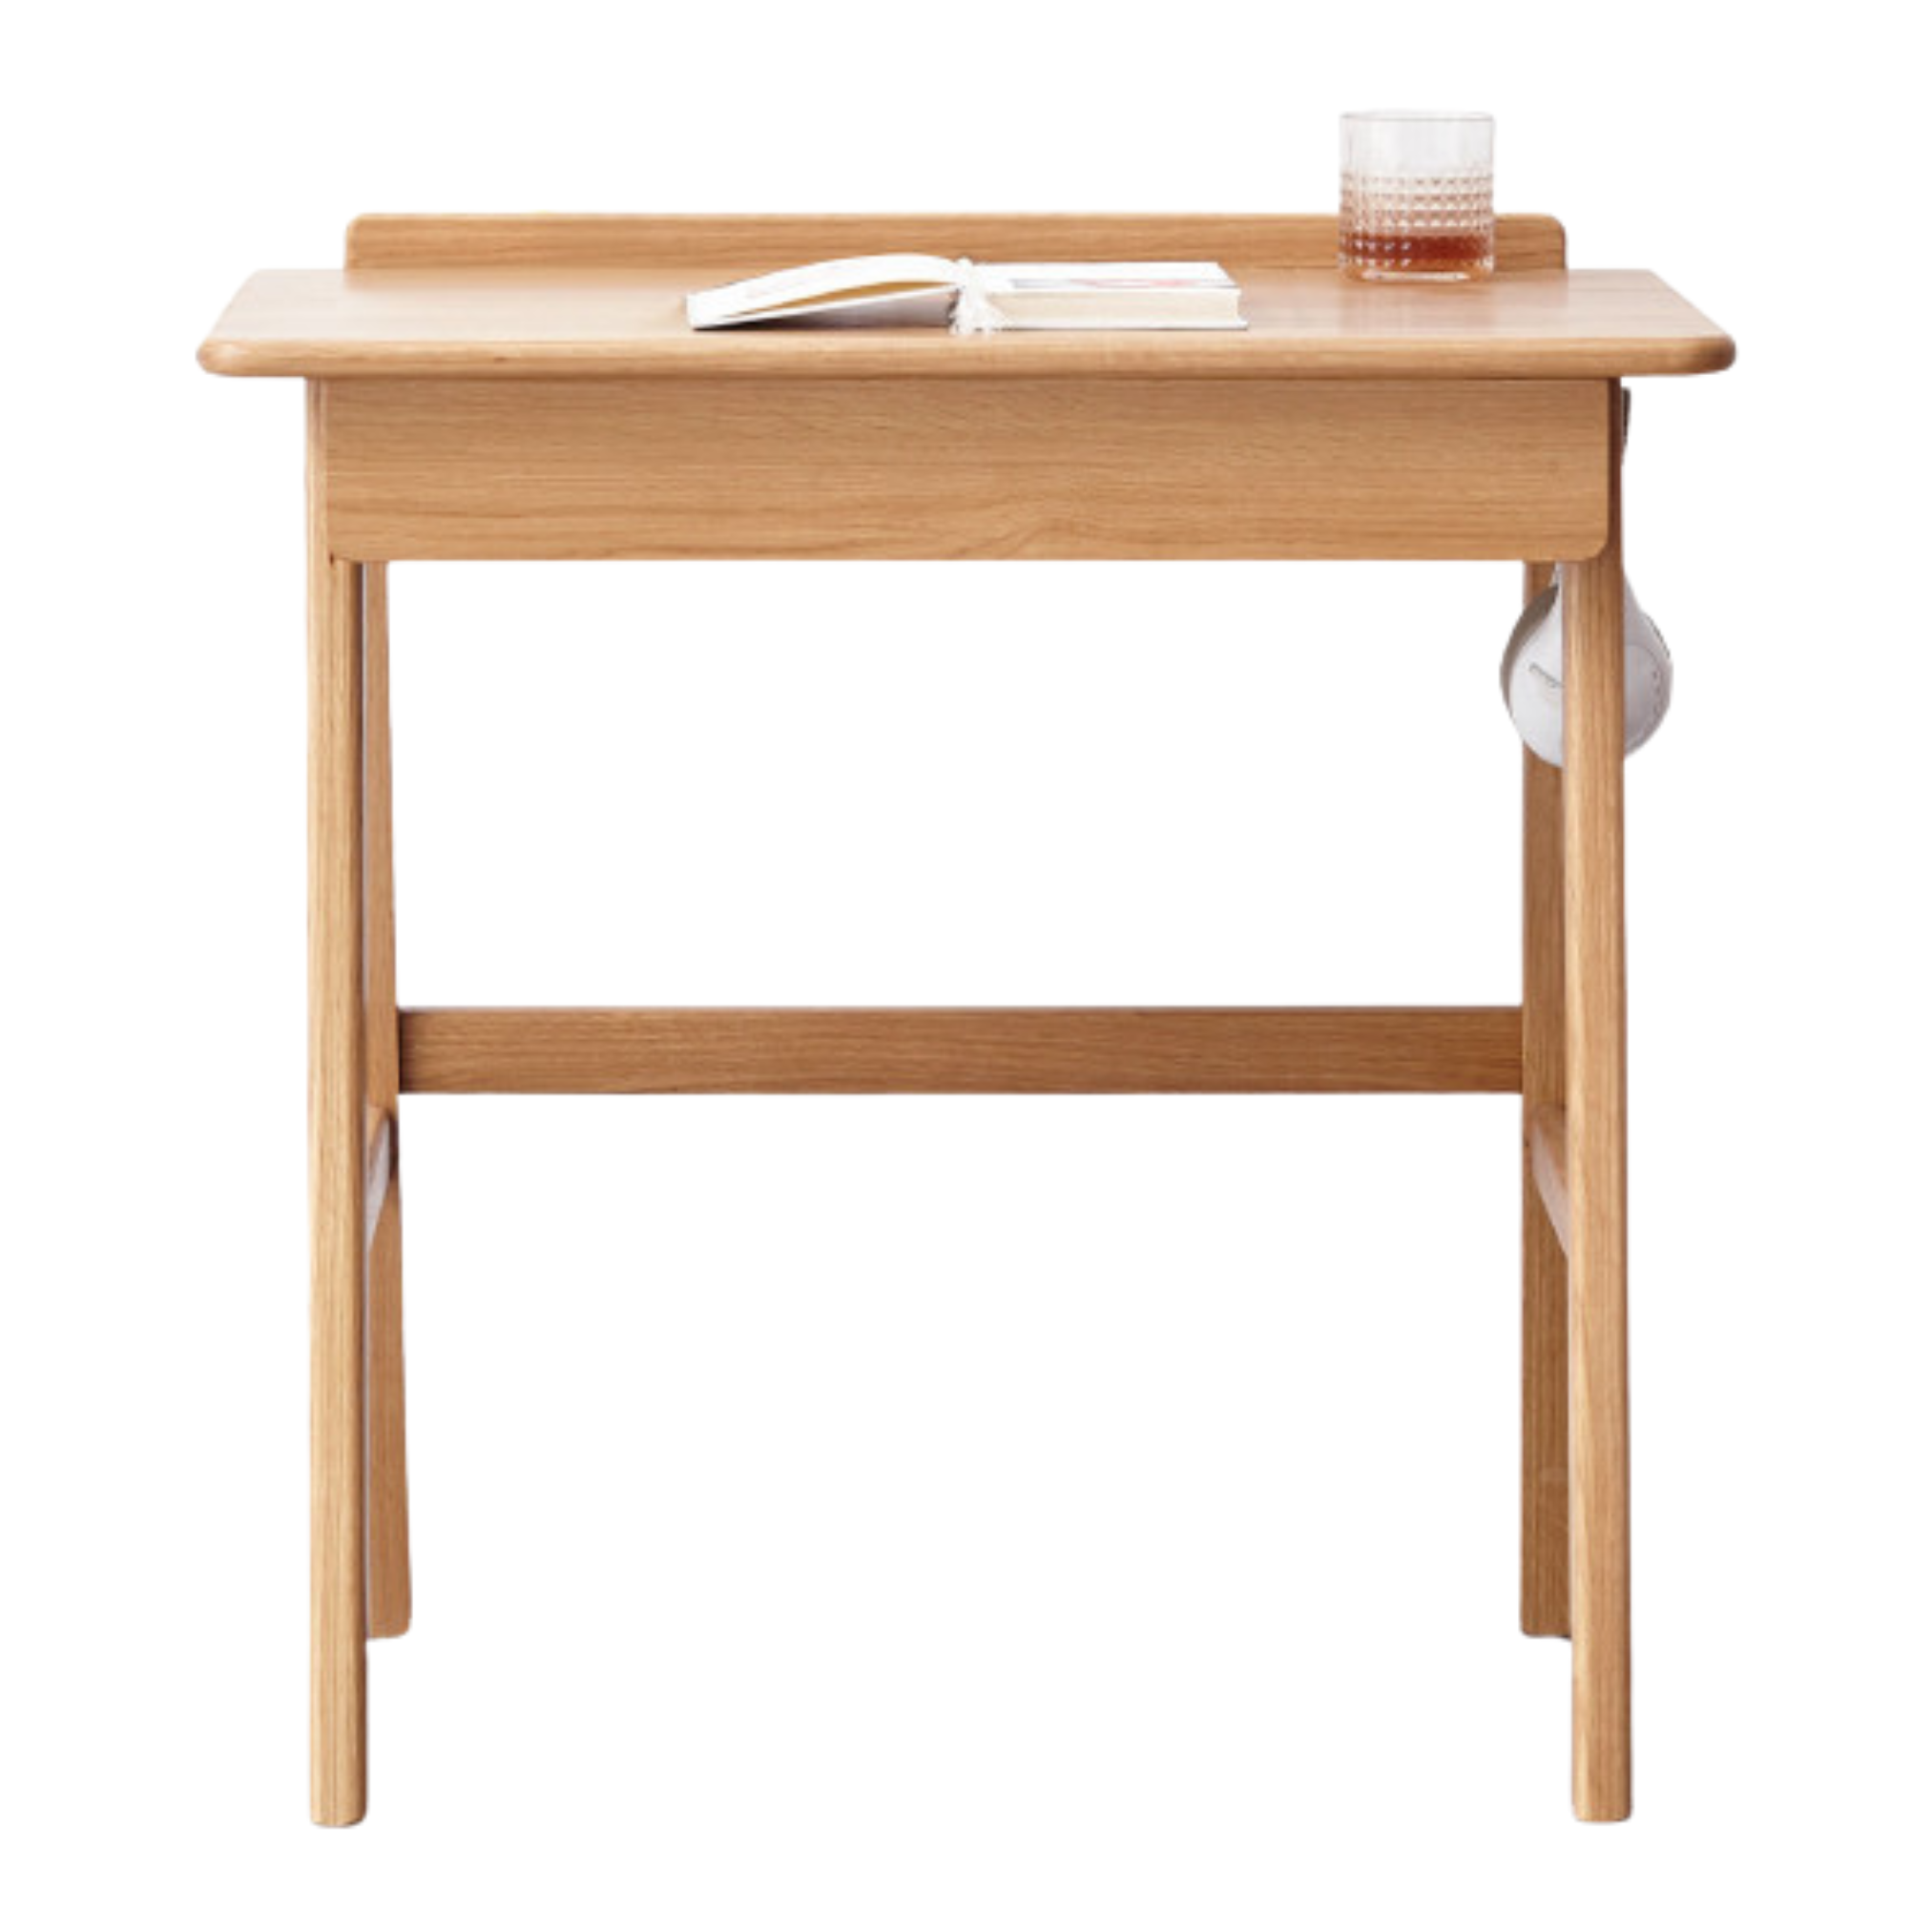 Oak solid wood Office desk, console table, dressing table